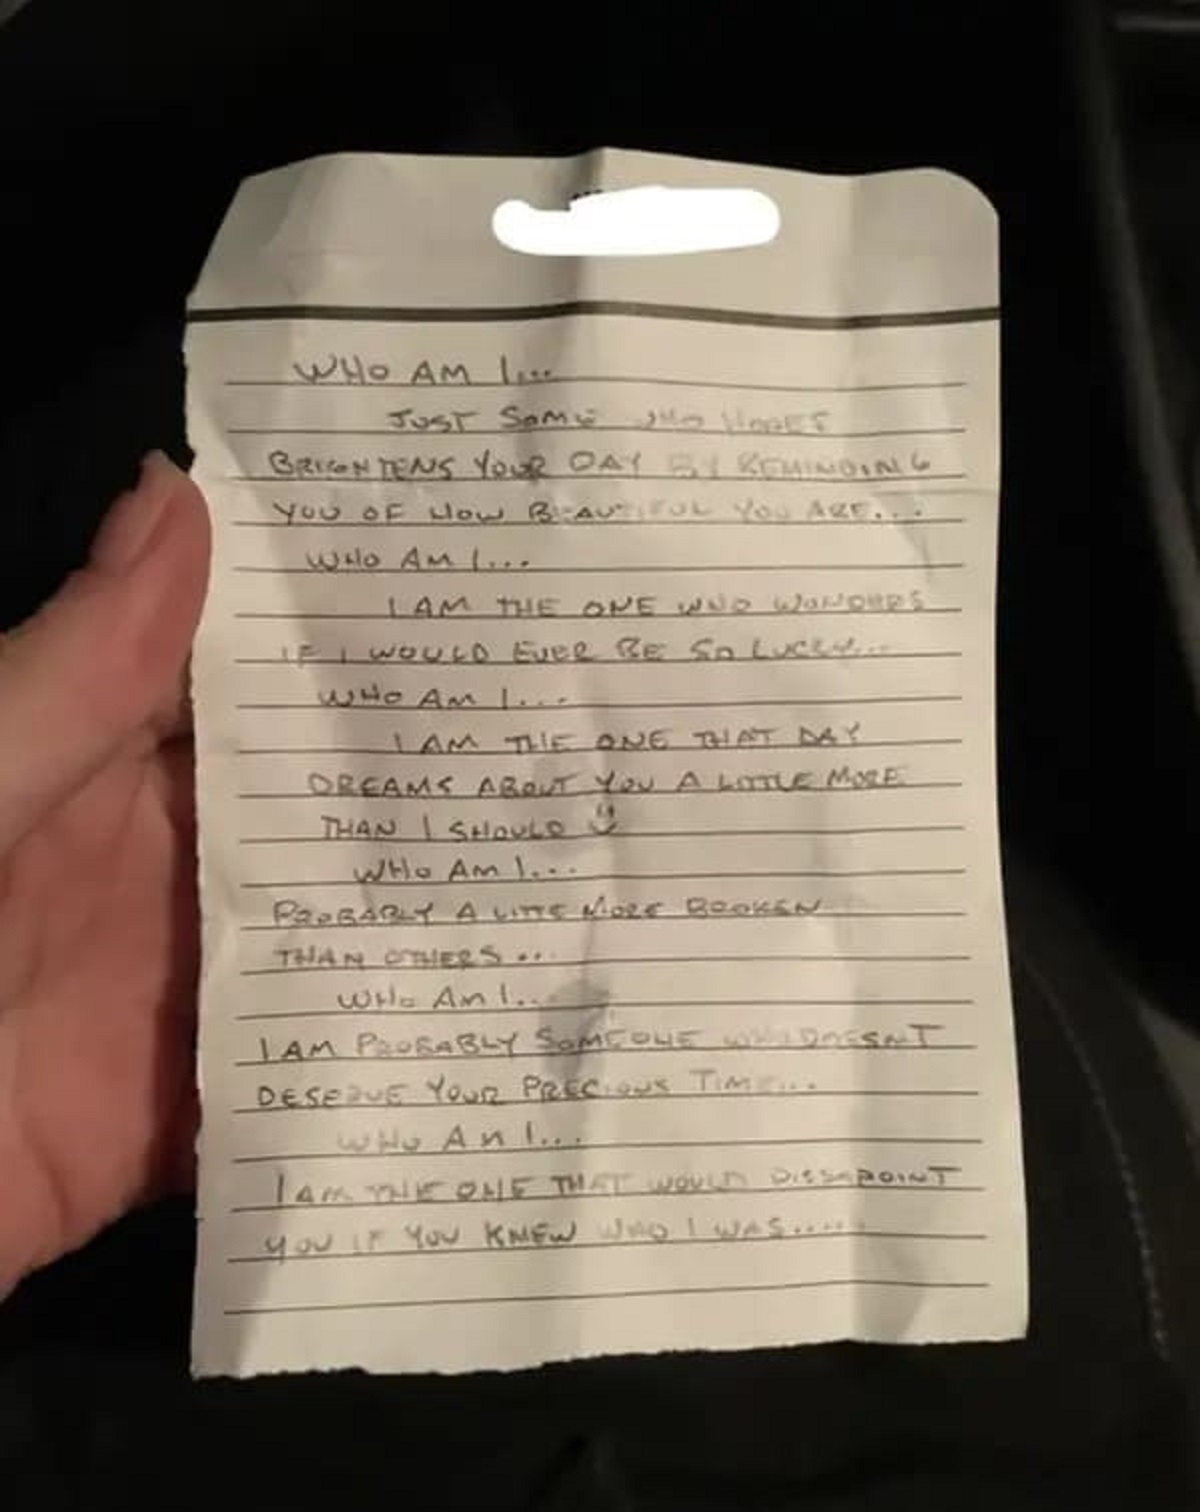 “Someone’s been leaving notes on my car at work, this is the most recent and in-depth one yet. Nope.”